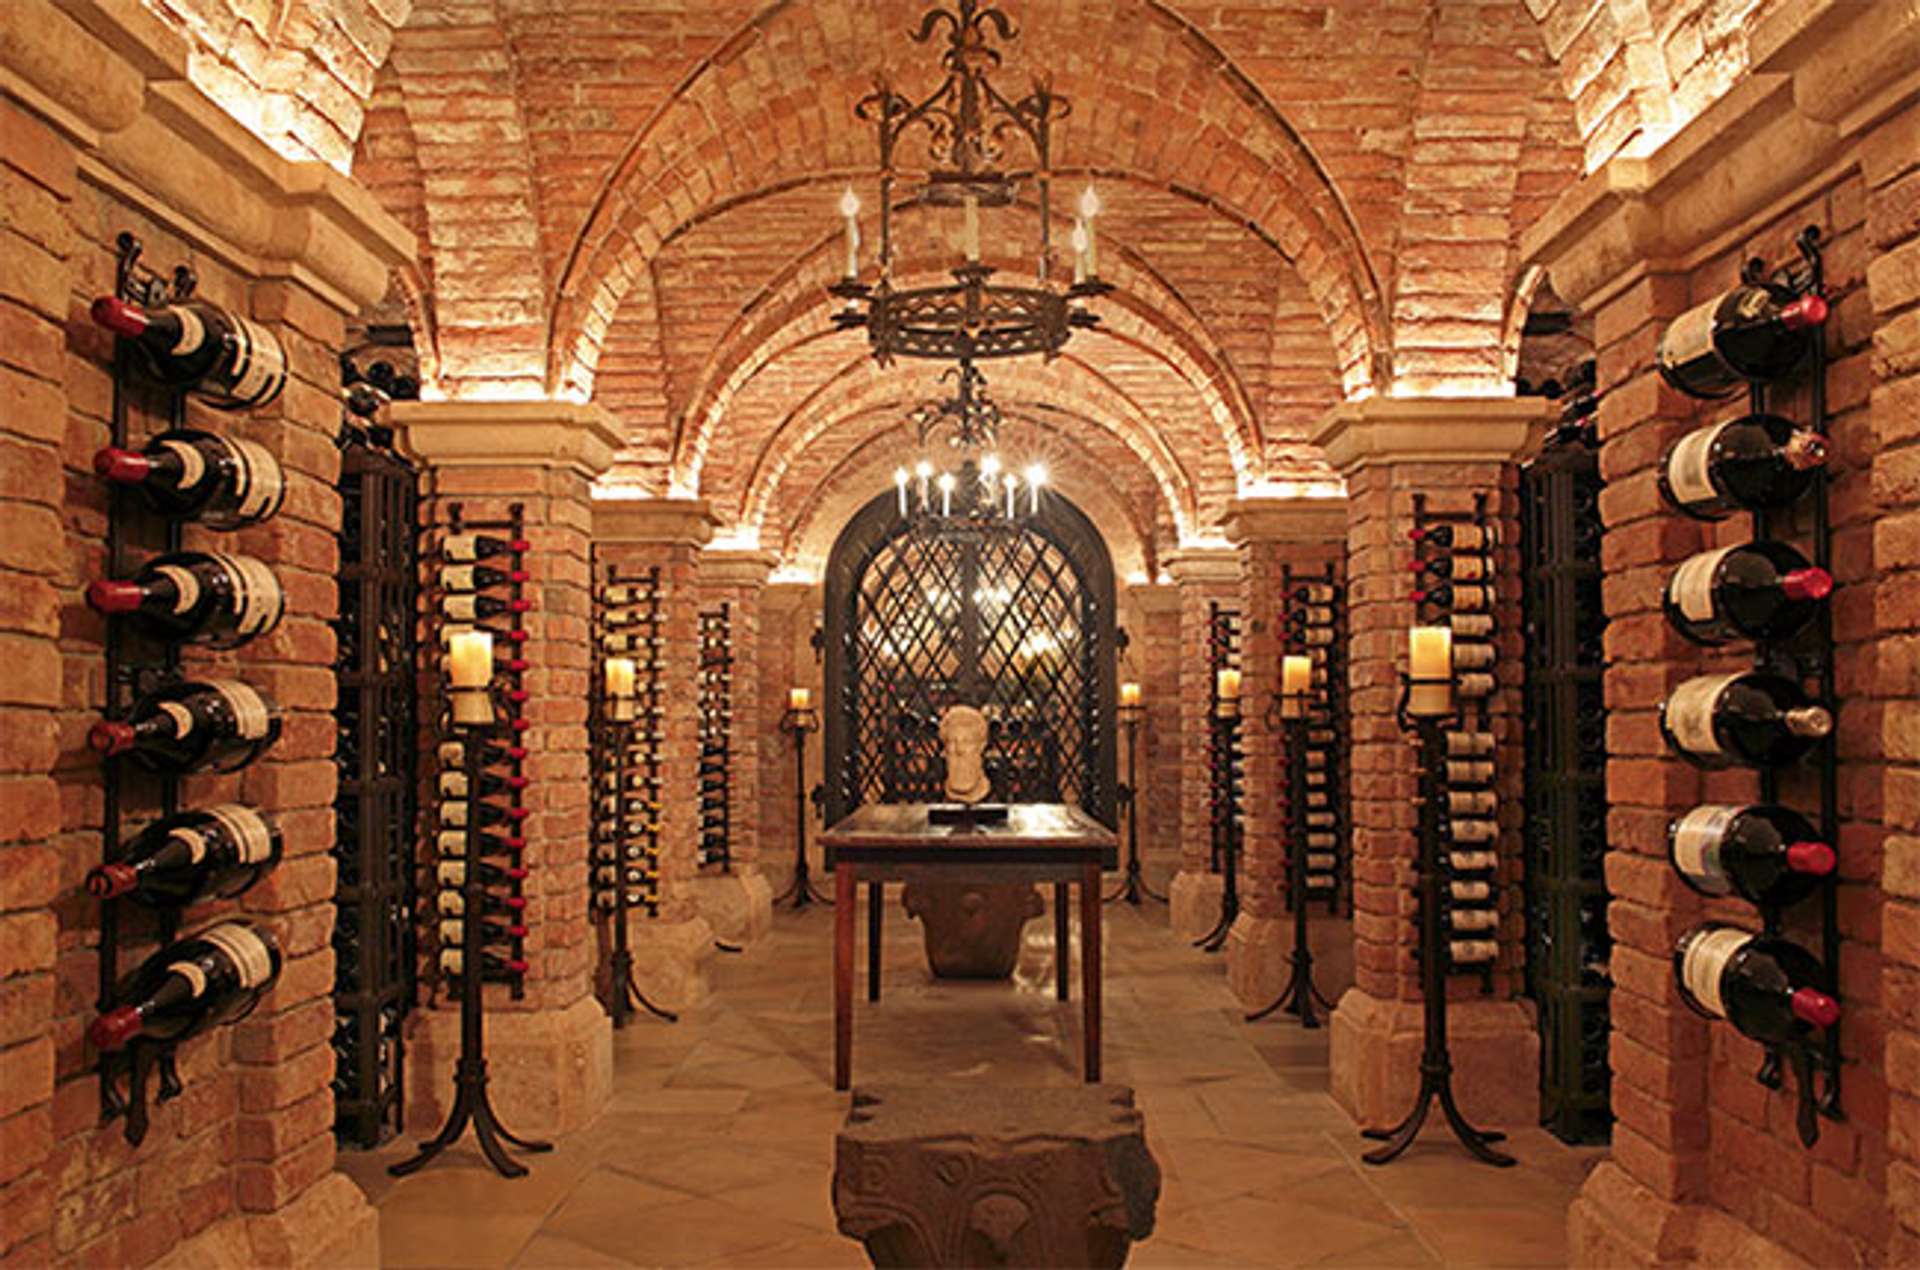 Brick wine cellar with bottles down the side of the walls and a hanging chandelier